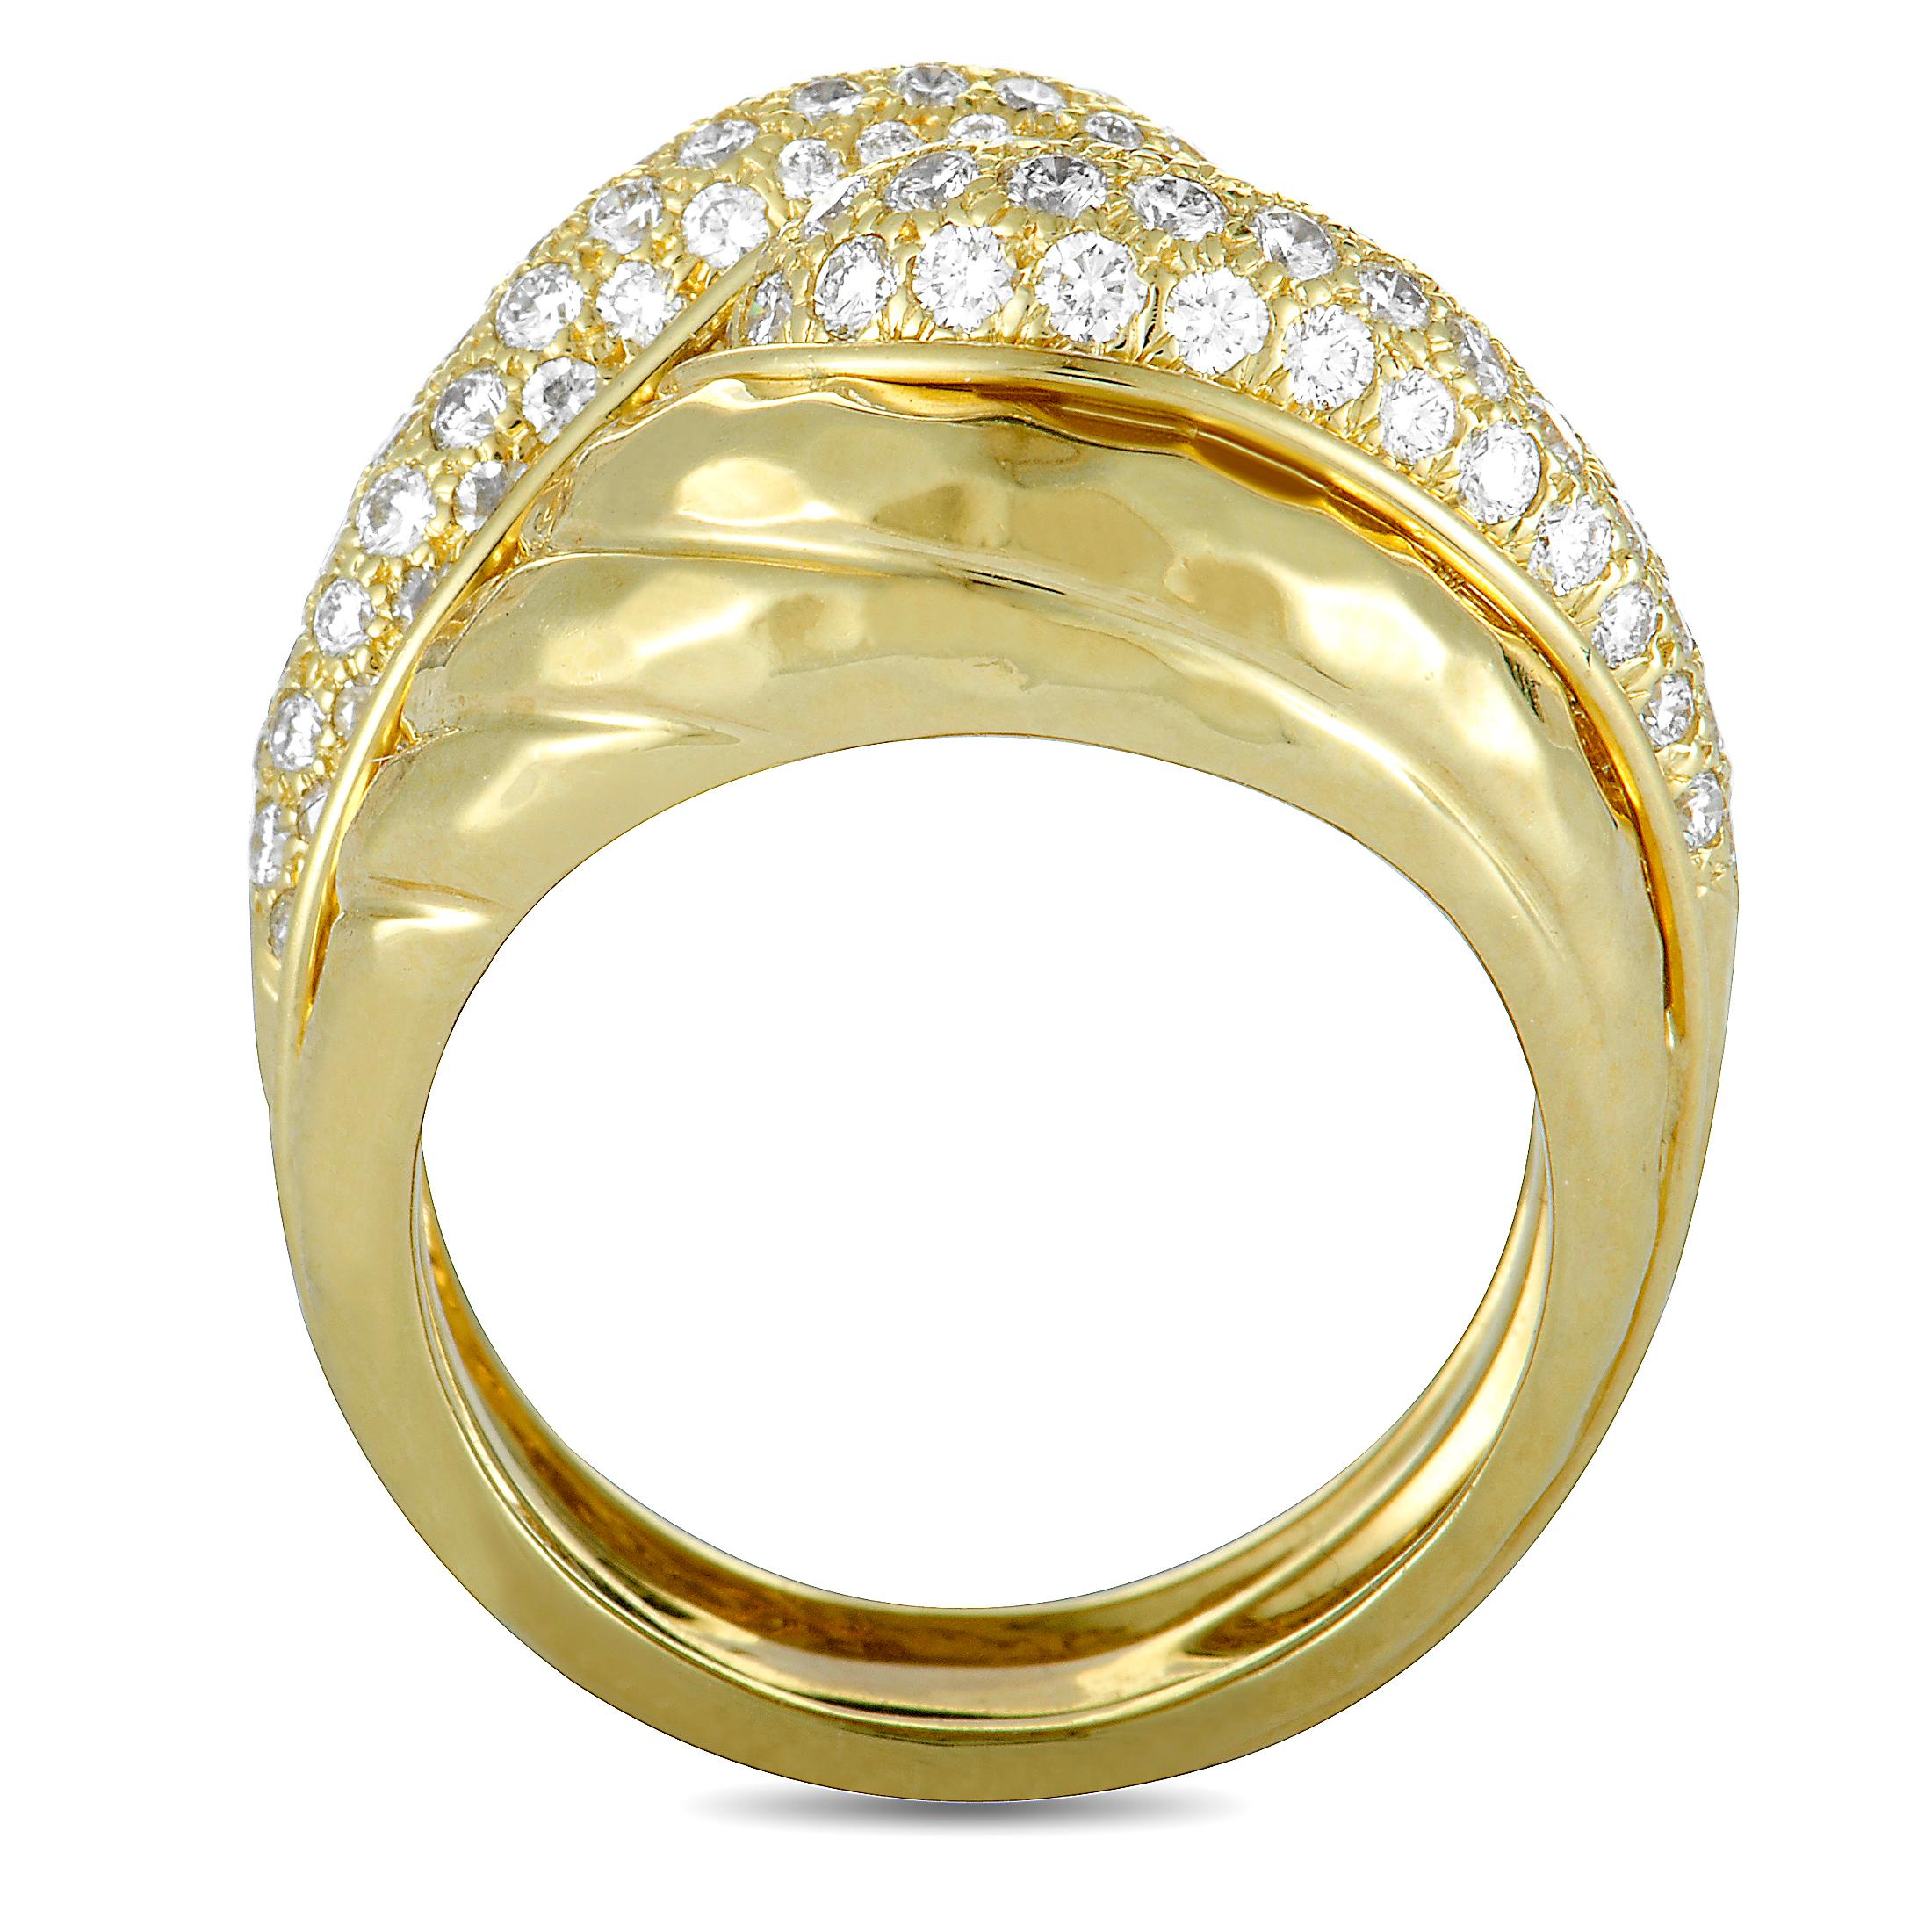 This Henry Dunay ring is made of 18K yellow gold and set with a total of 1.75 carats of diamonds that feature grade F color and VS1 clarity. The ring weighs 17.9 grams and boasts band thickness of 6 mm and top height of 8 mm, while top dimensions